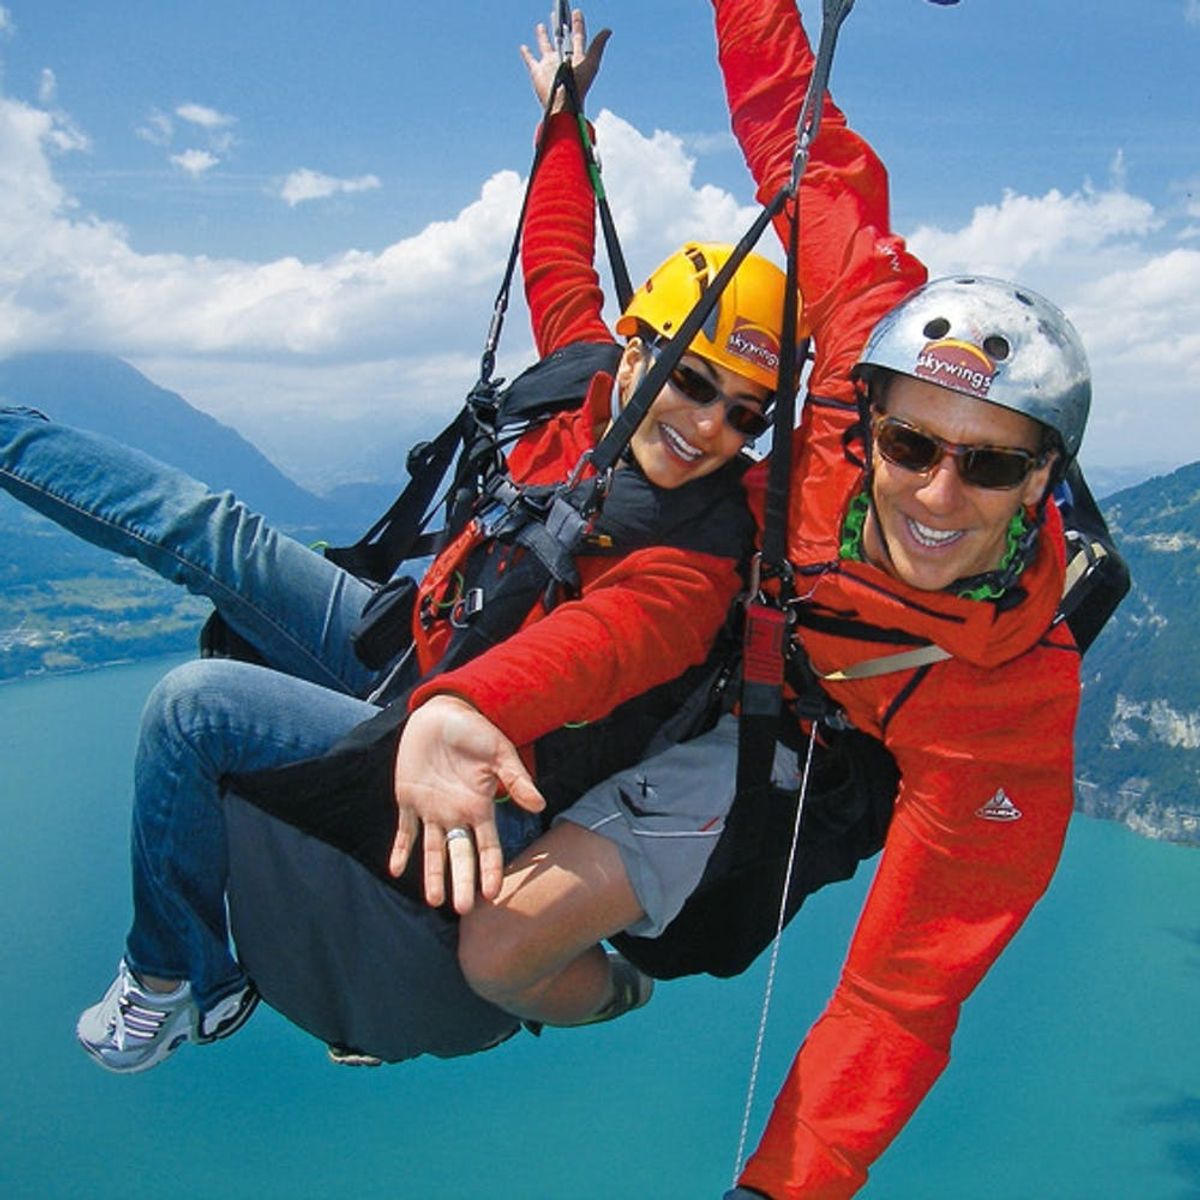 15 Things All Adrenaline Junkies Should Do in Their Lifetime